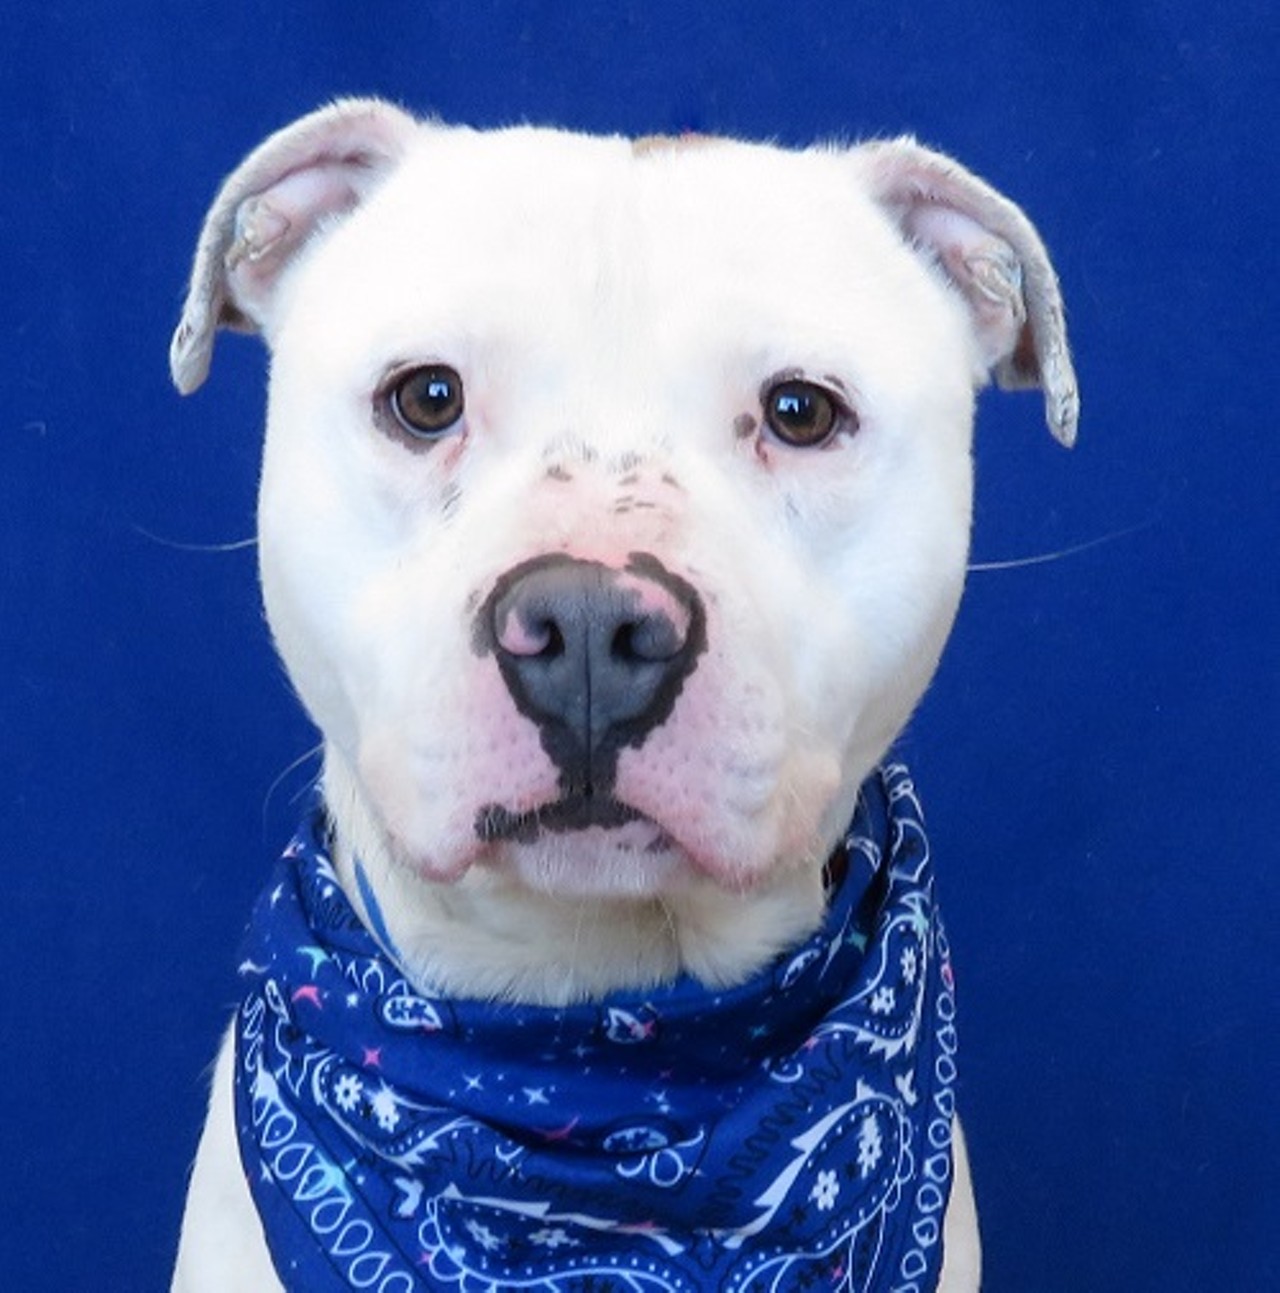 NAME: Triton
GENDER: Male
BREED: Pit Bull
AGE: 2 years
WEIGHT: 55 pounds
SPECIAL CONSIDERATIONS: Prefers a home with older children
REASON I CAME TO MHS: Rescued in Detroit
LOCATION: Mackey Center for Animal Care in Detroit
ID NUMBER: 866947